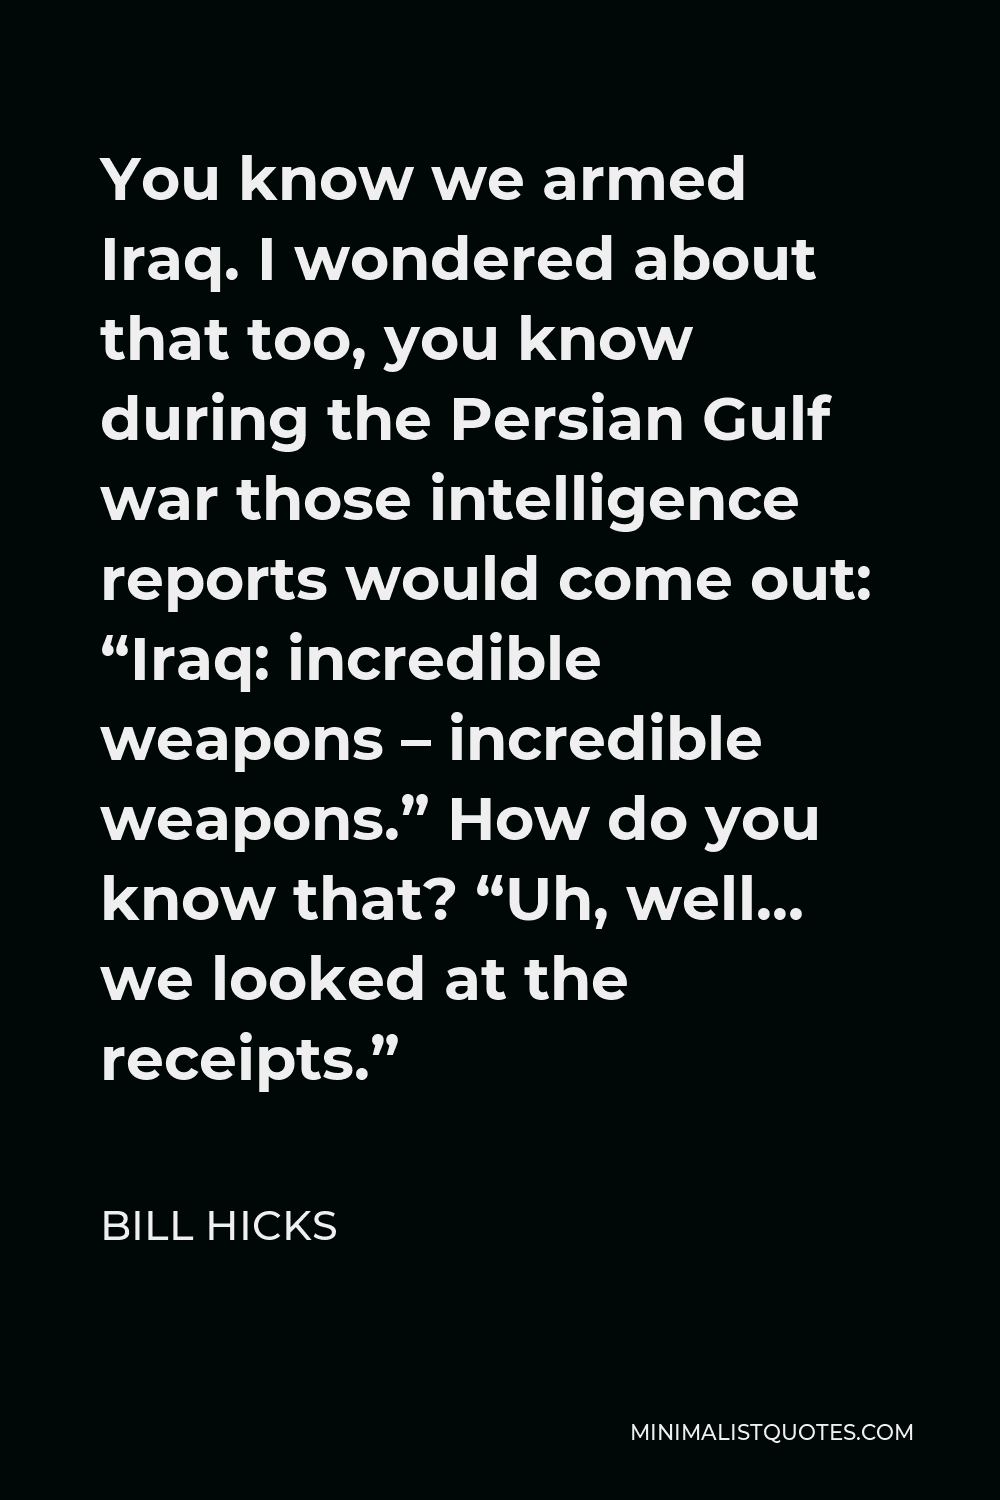 Bill Hicks Quote - You know we armed Iraq. I wondered about that too, you know during the Persian Gulf war those intelligence reports would come out: “Iraq: incredible weapons – incredible weapons.” How do you know that? “Uh, well… we looked at the receipts.”